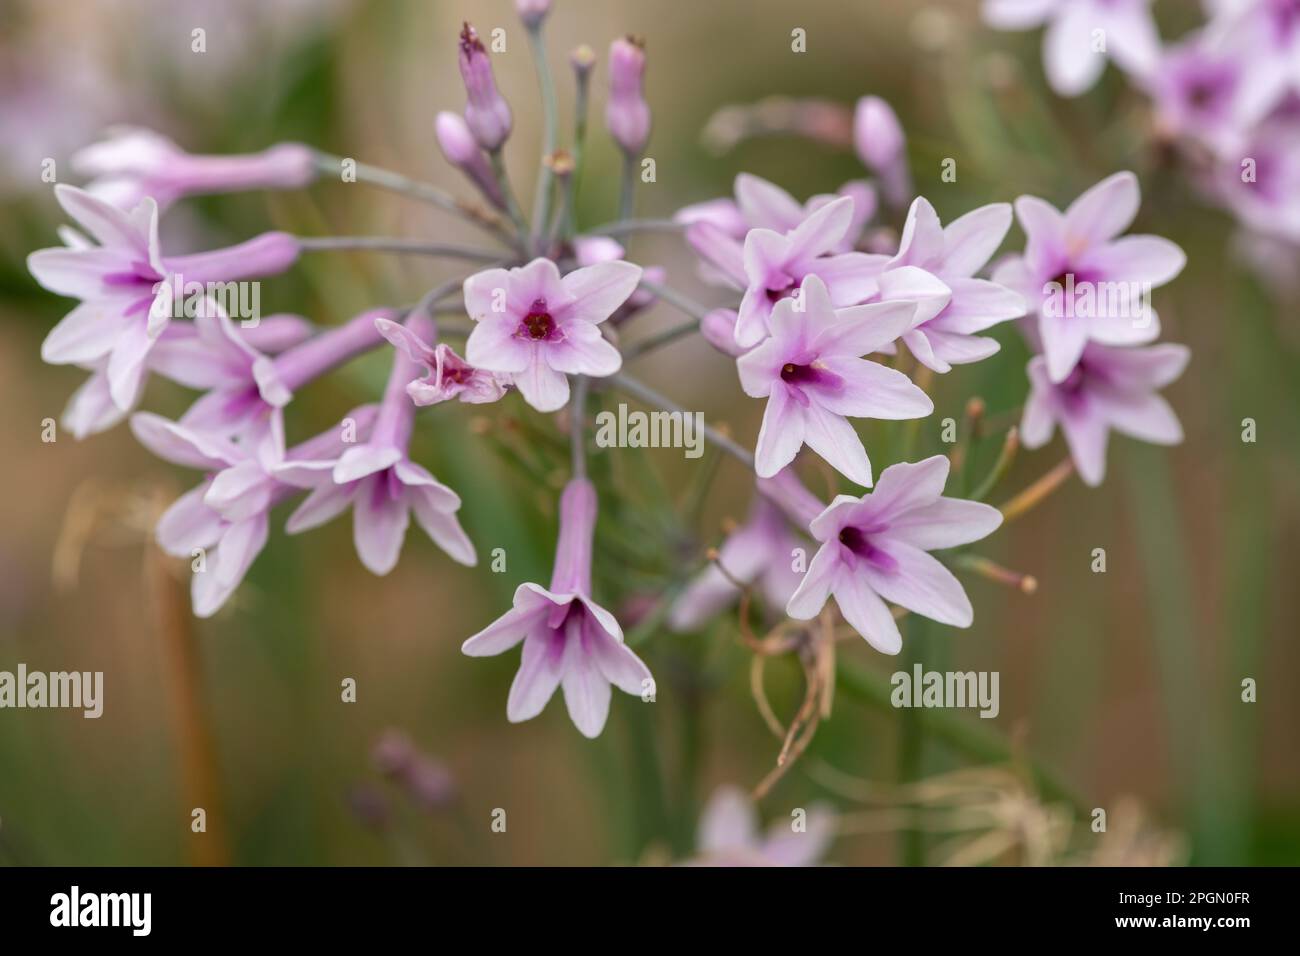 Close up of society garlic (tulbaghia violacea) flowers in bloom Stock Photo